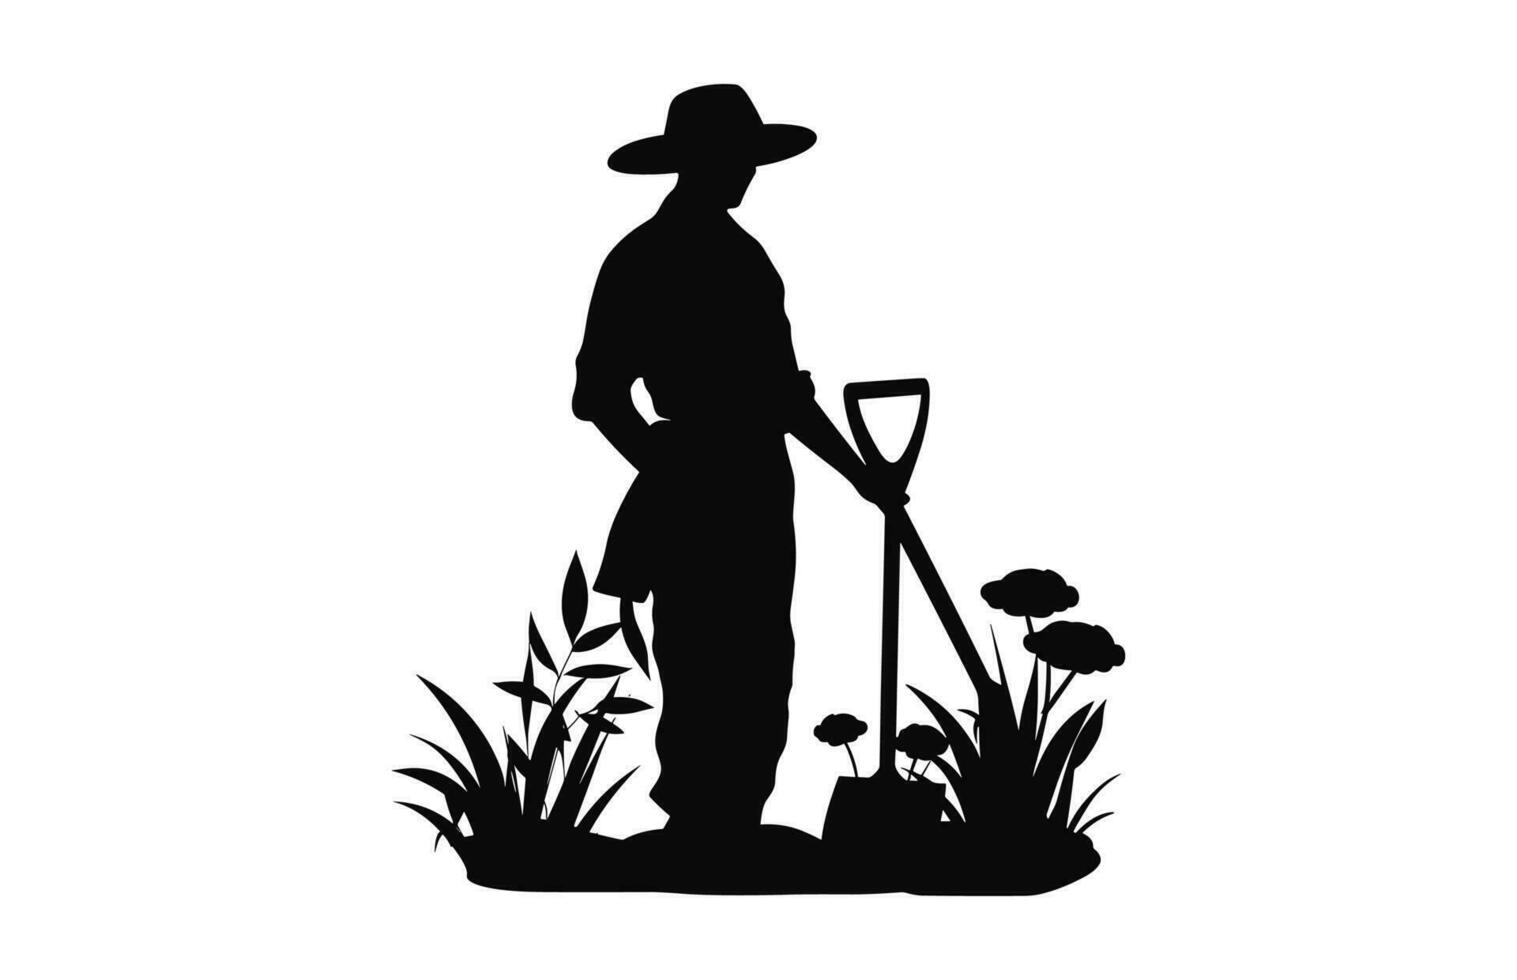 A Gardening Silhouette, A Gardener black vector isolated on a white background